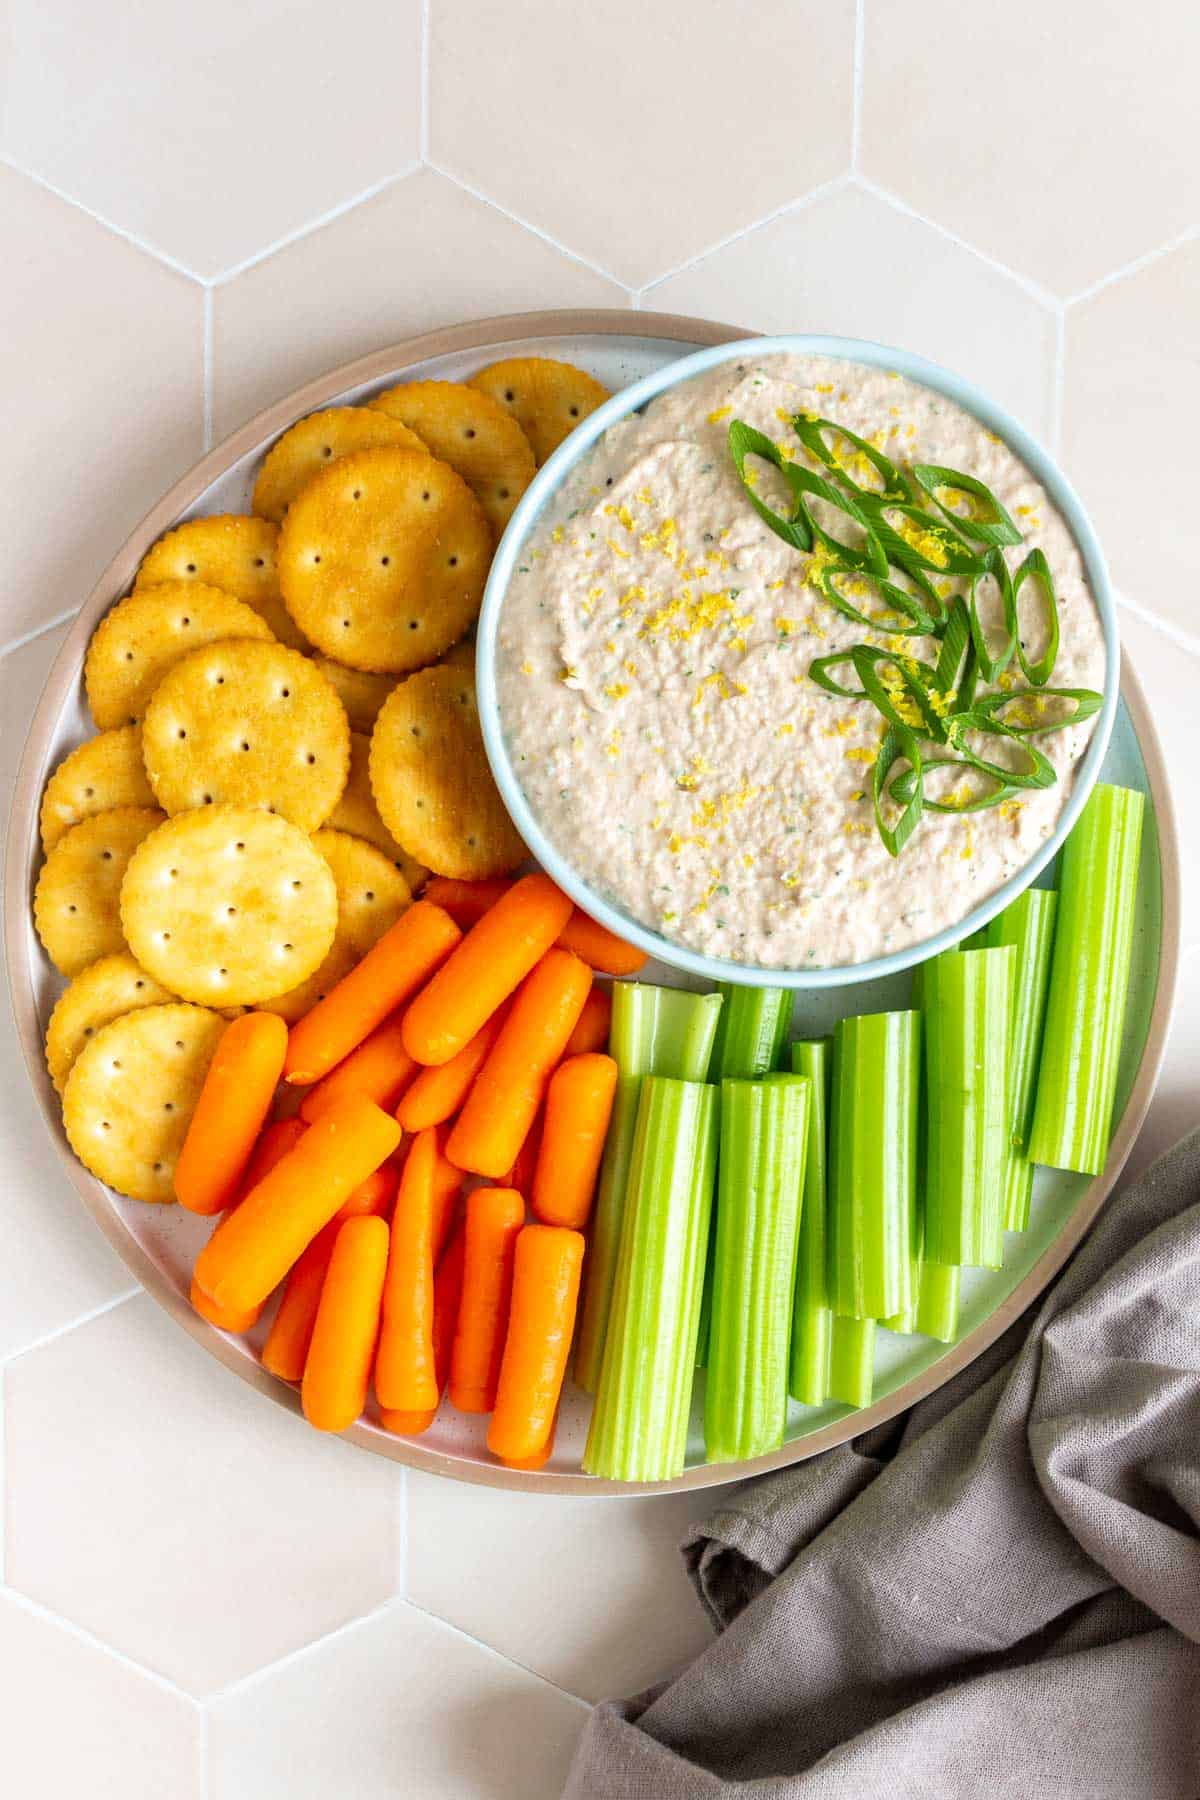 A plate of crackers, carrots, and celery stick with a bowl of tuna dip.